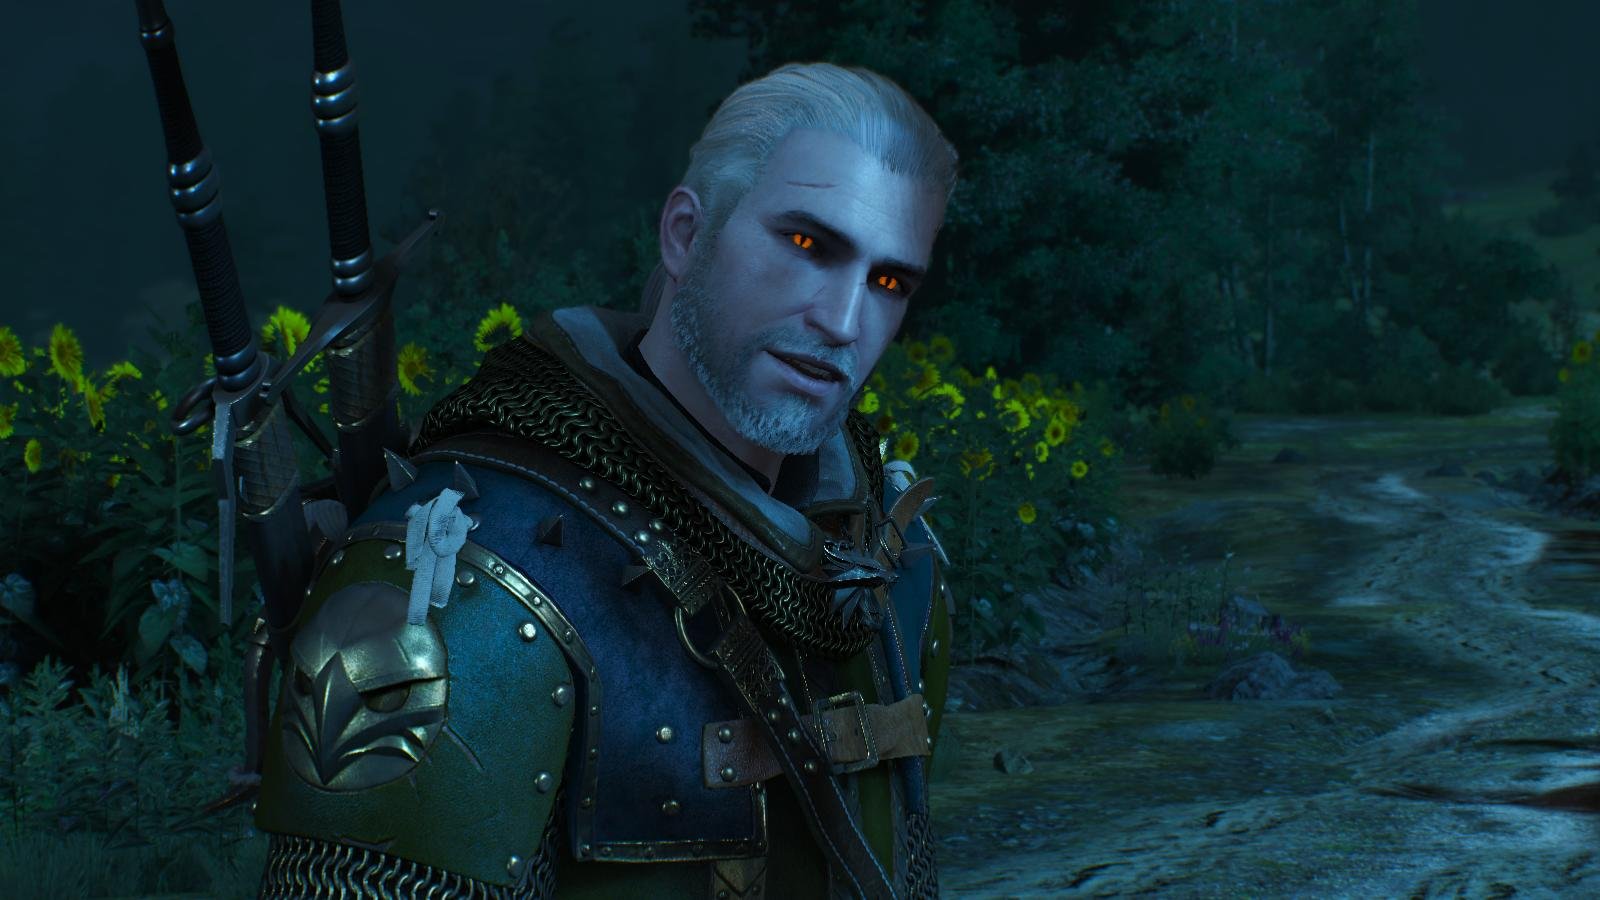 Witcher 3 knights tale